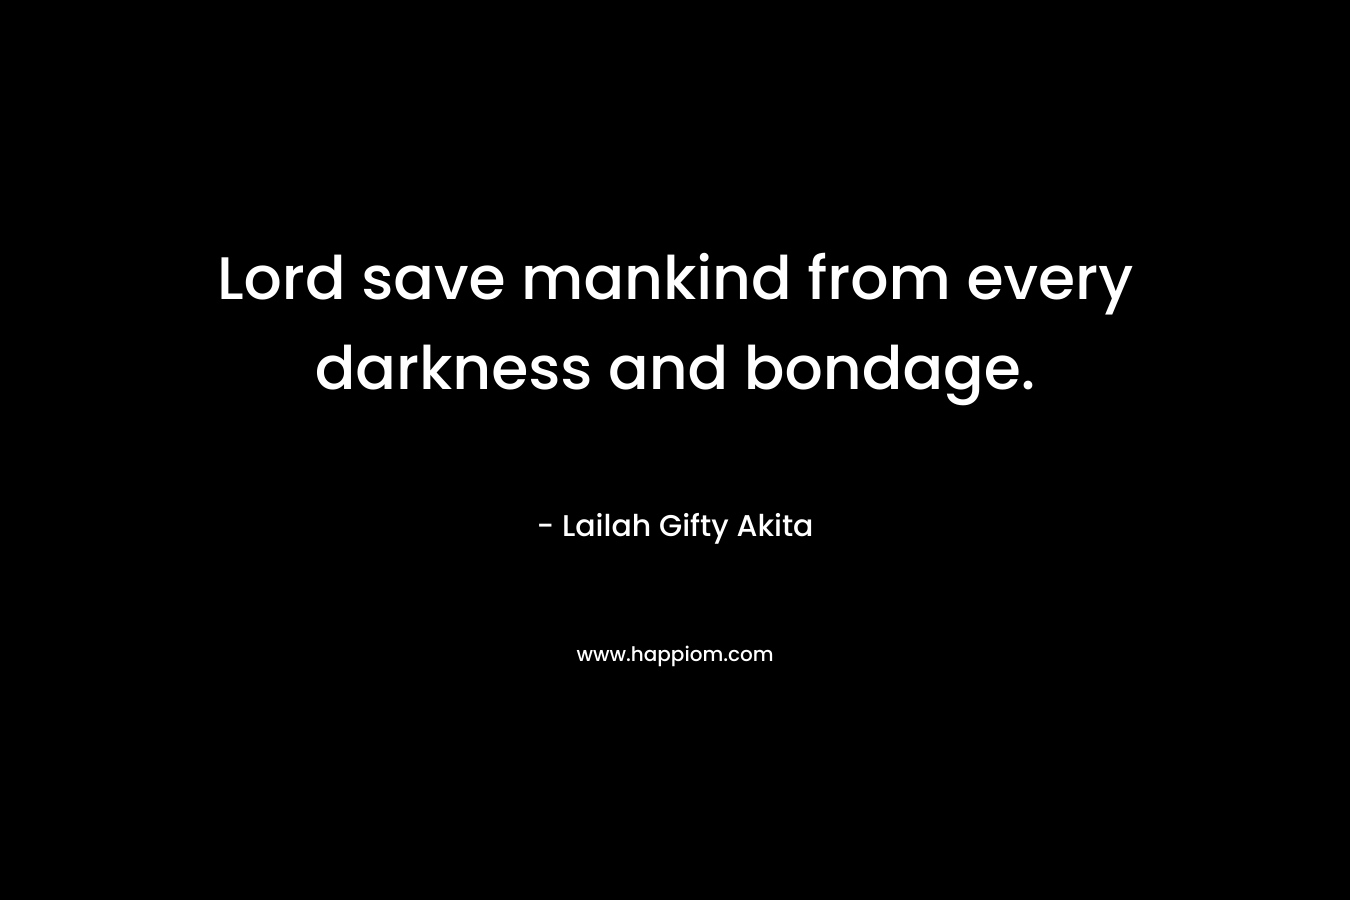 Lord save mankind from every darkness and bondage. – Lailah Gifty Akita